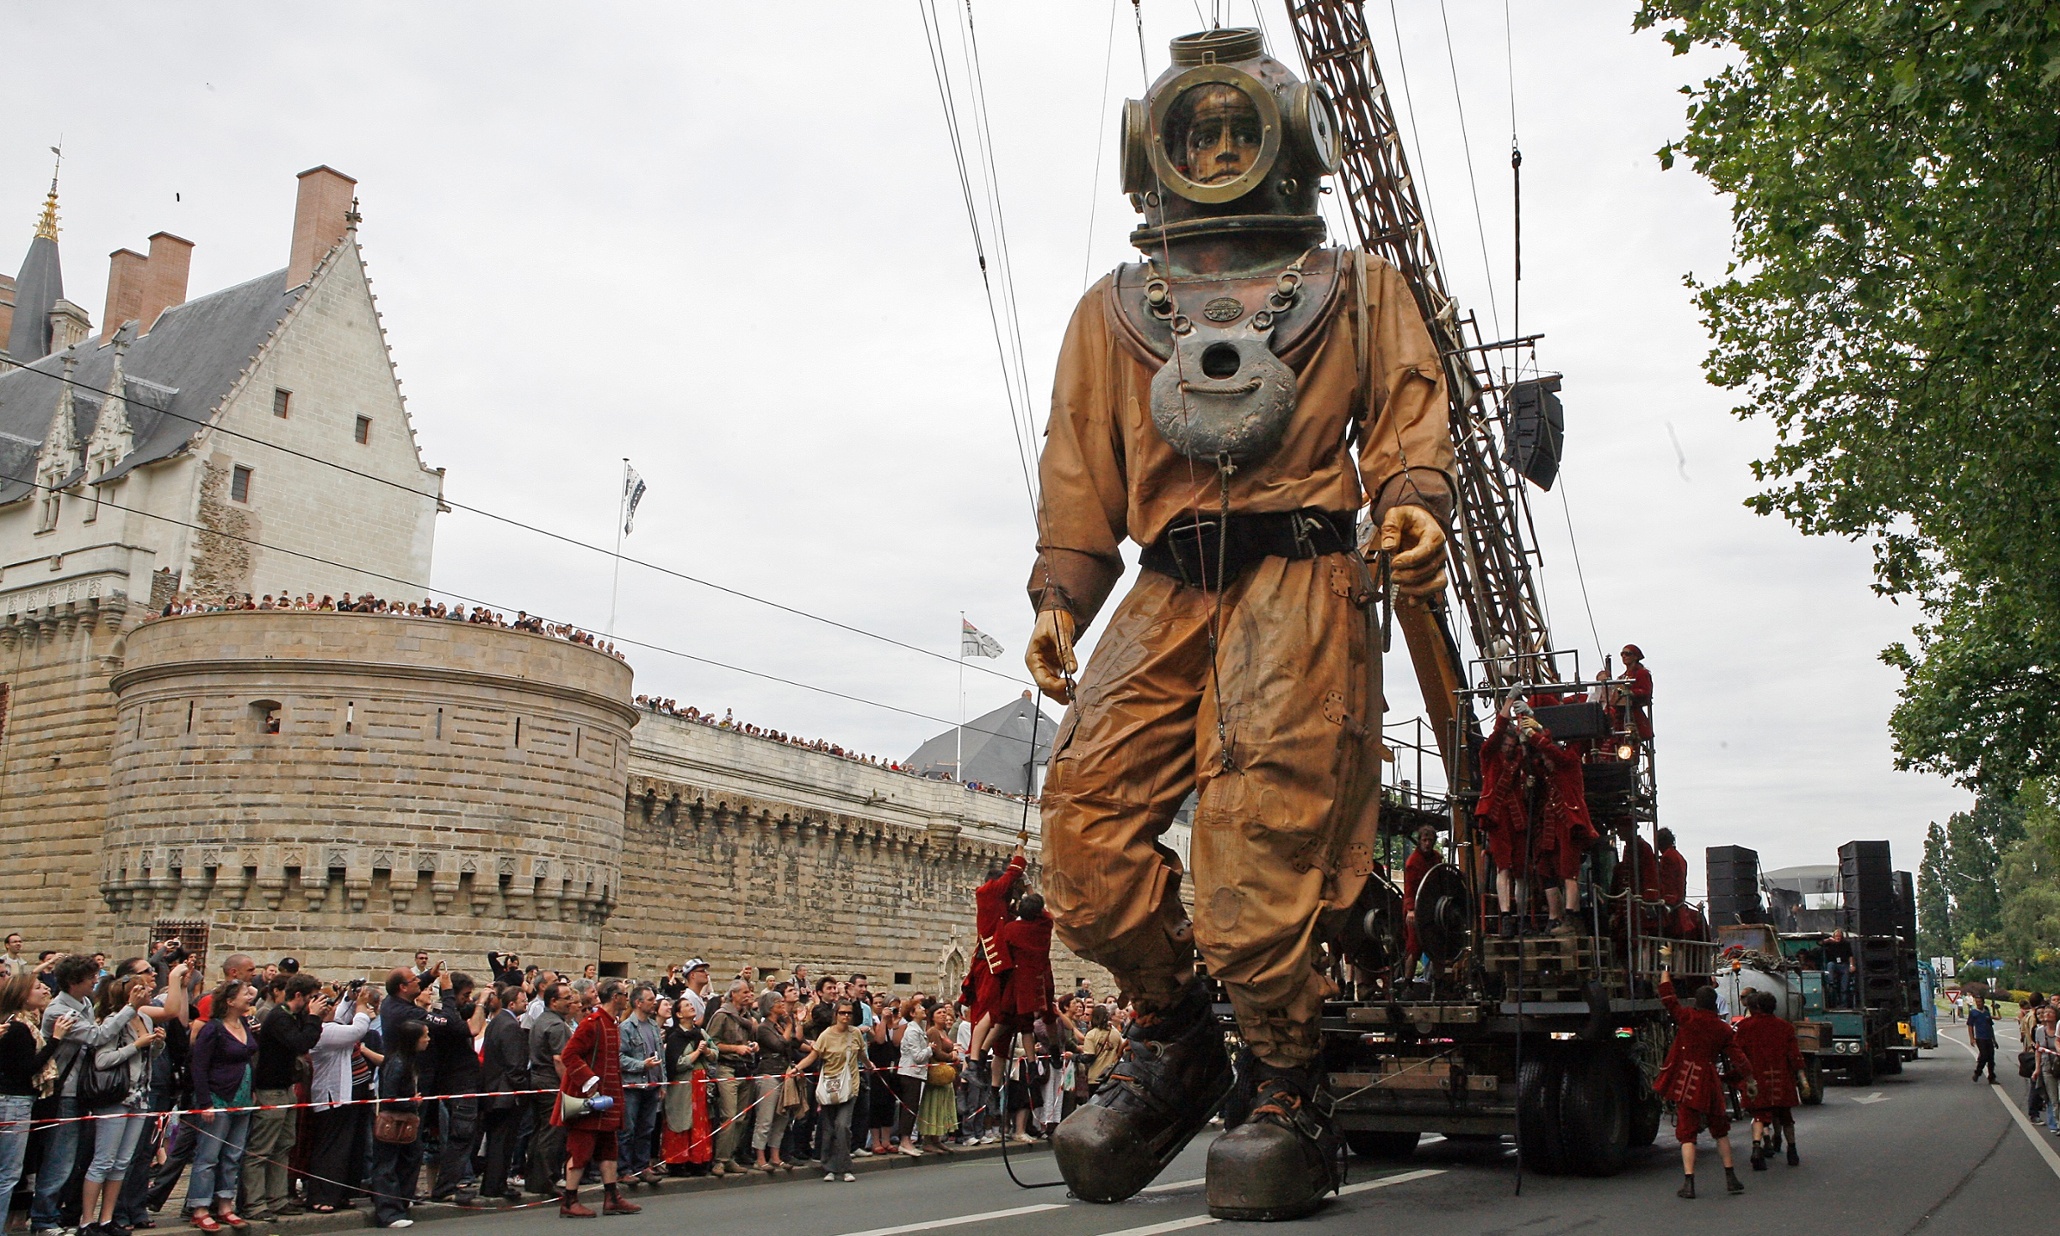 The Giants will walk the streets of the City of Perth from Friday to Sunday